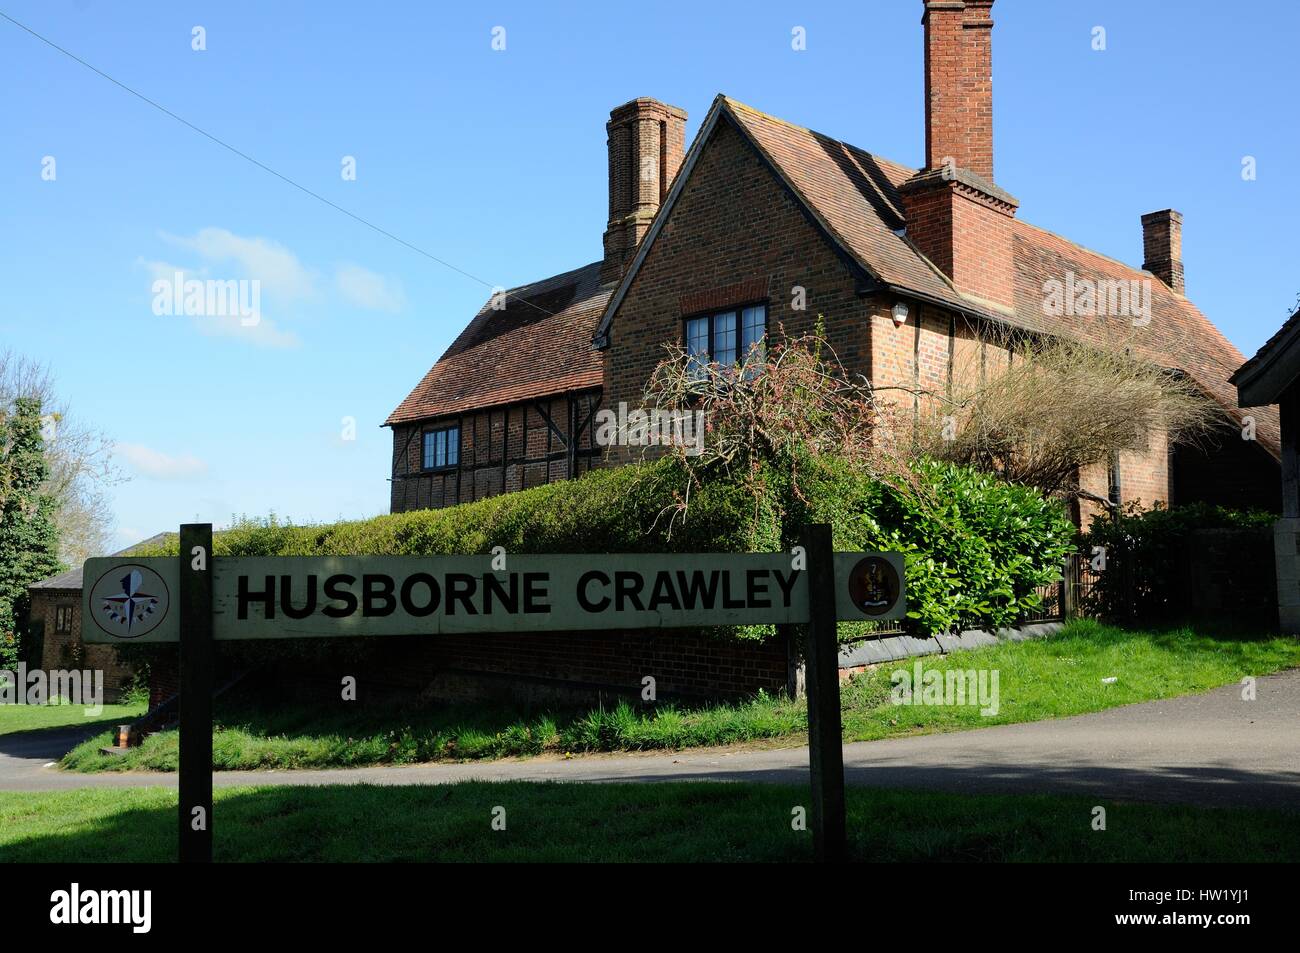 Manor Farm House, Husborne Crawley, Bedfordshire, stands in front of the church is a half-timbered building with brick infilling, and a tall chimney.  Stock Photo